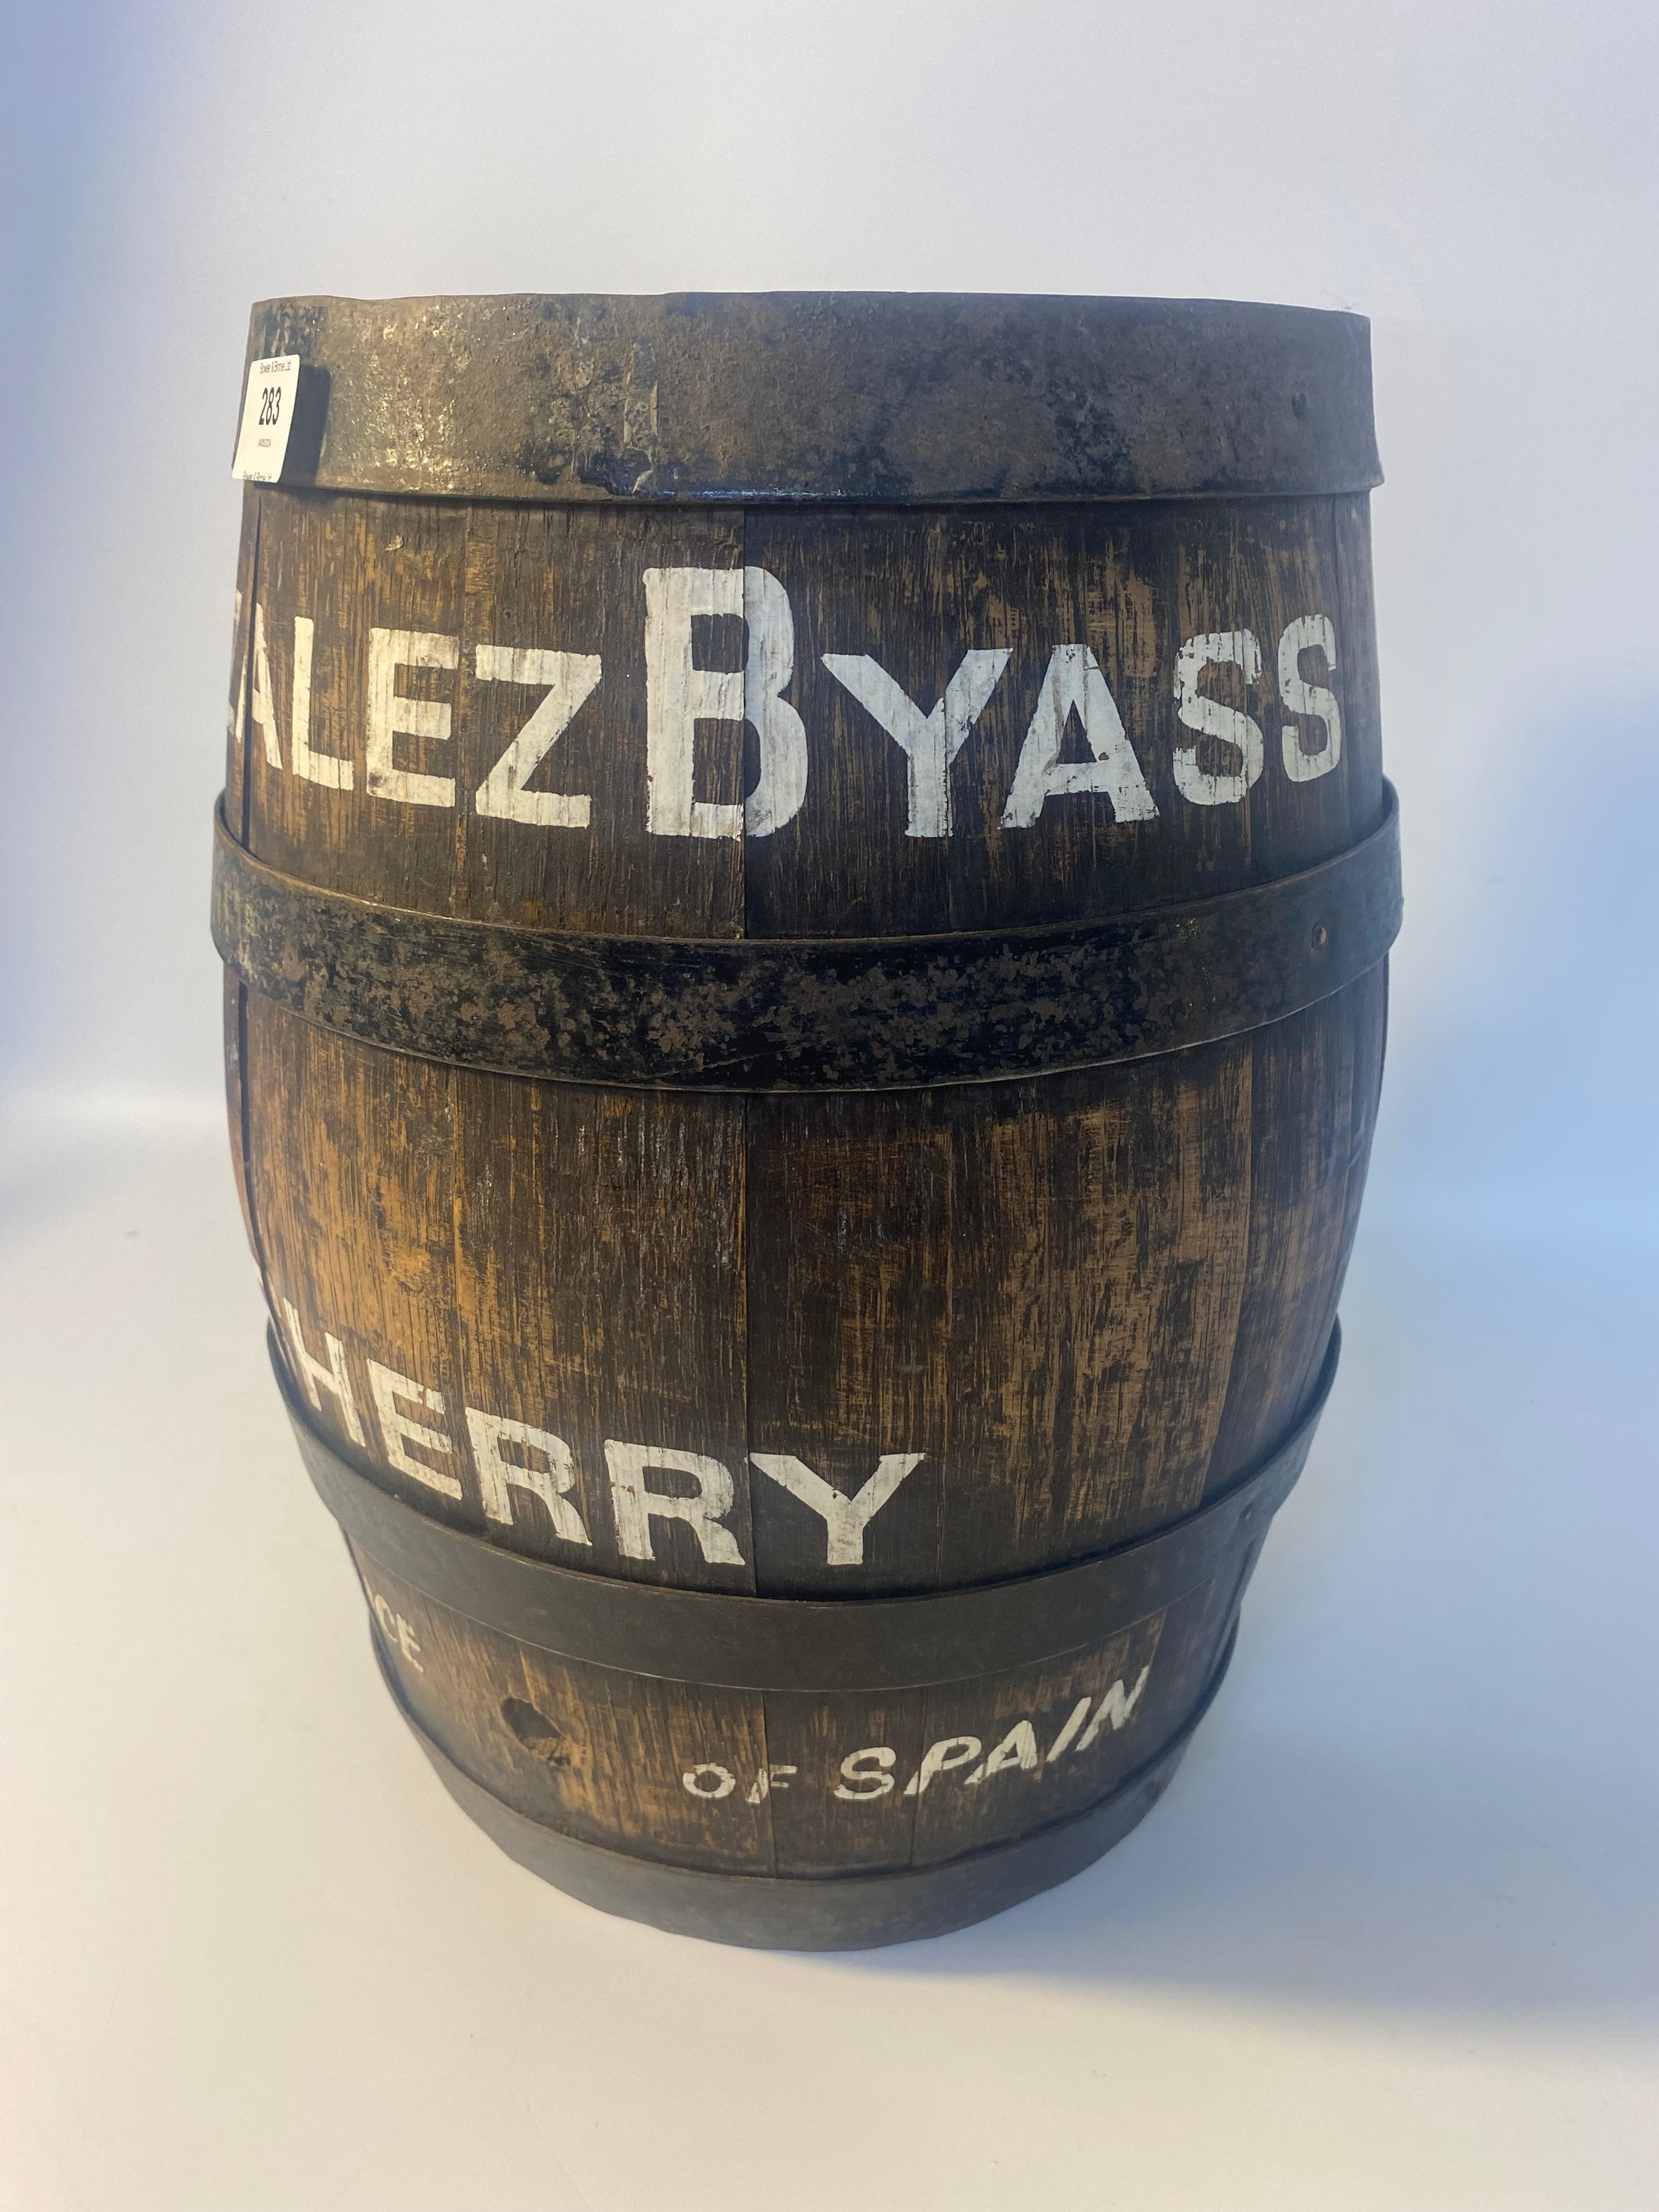 Antique wood & metal bounded sherry barrel [35.5x26cm] - Image 3 of 4